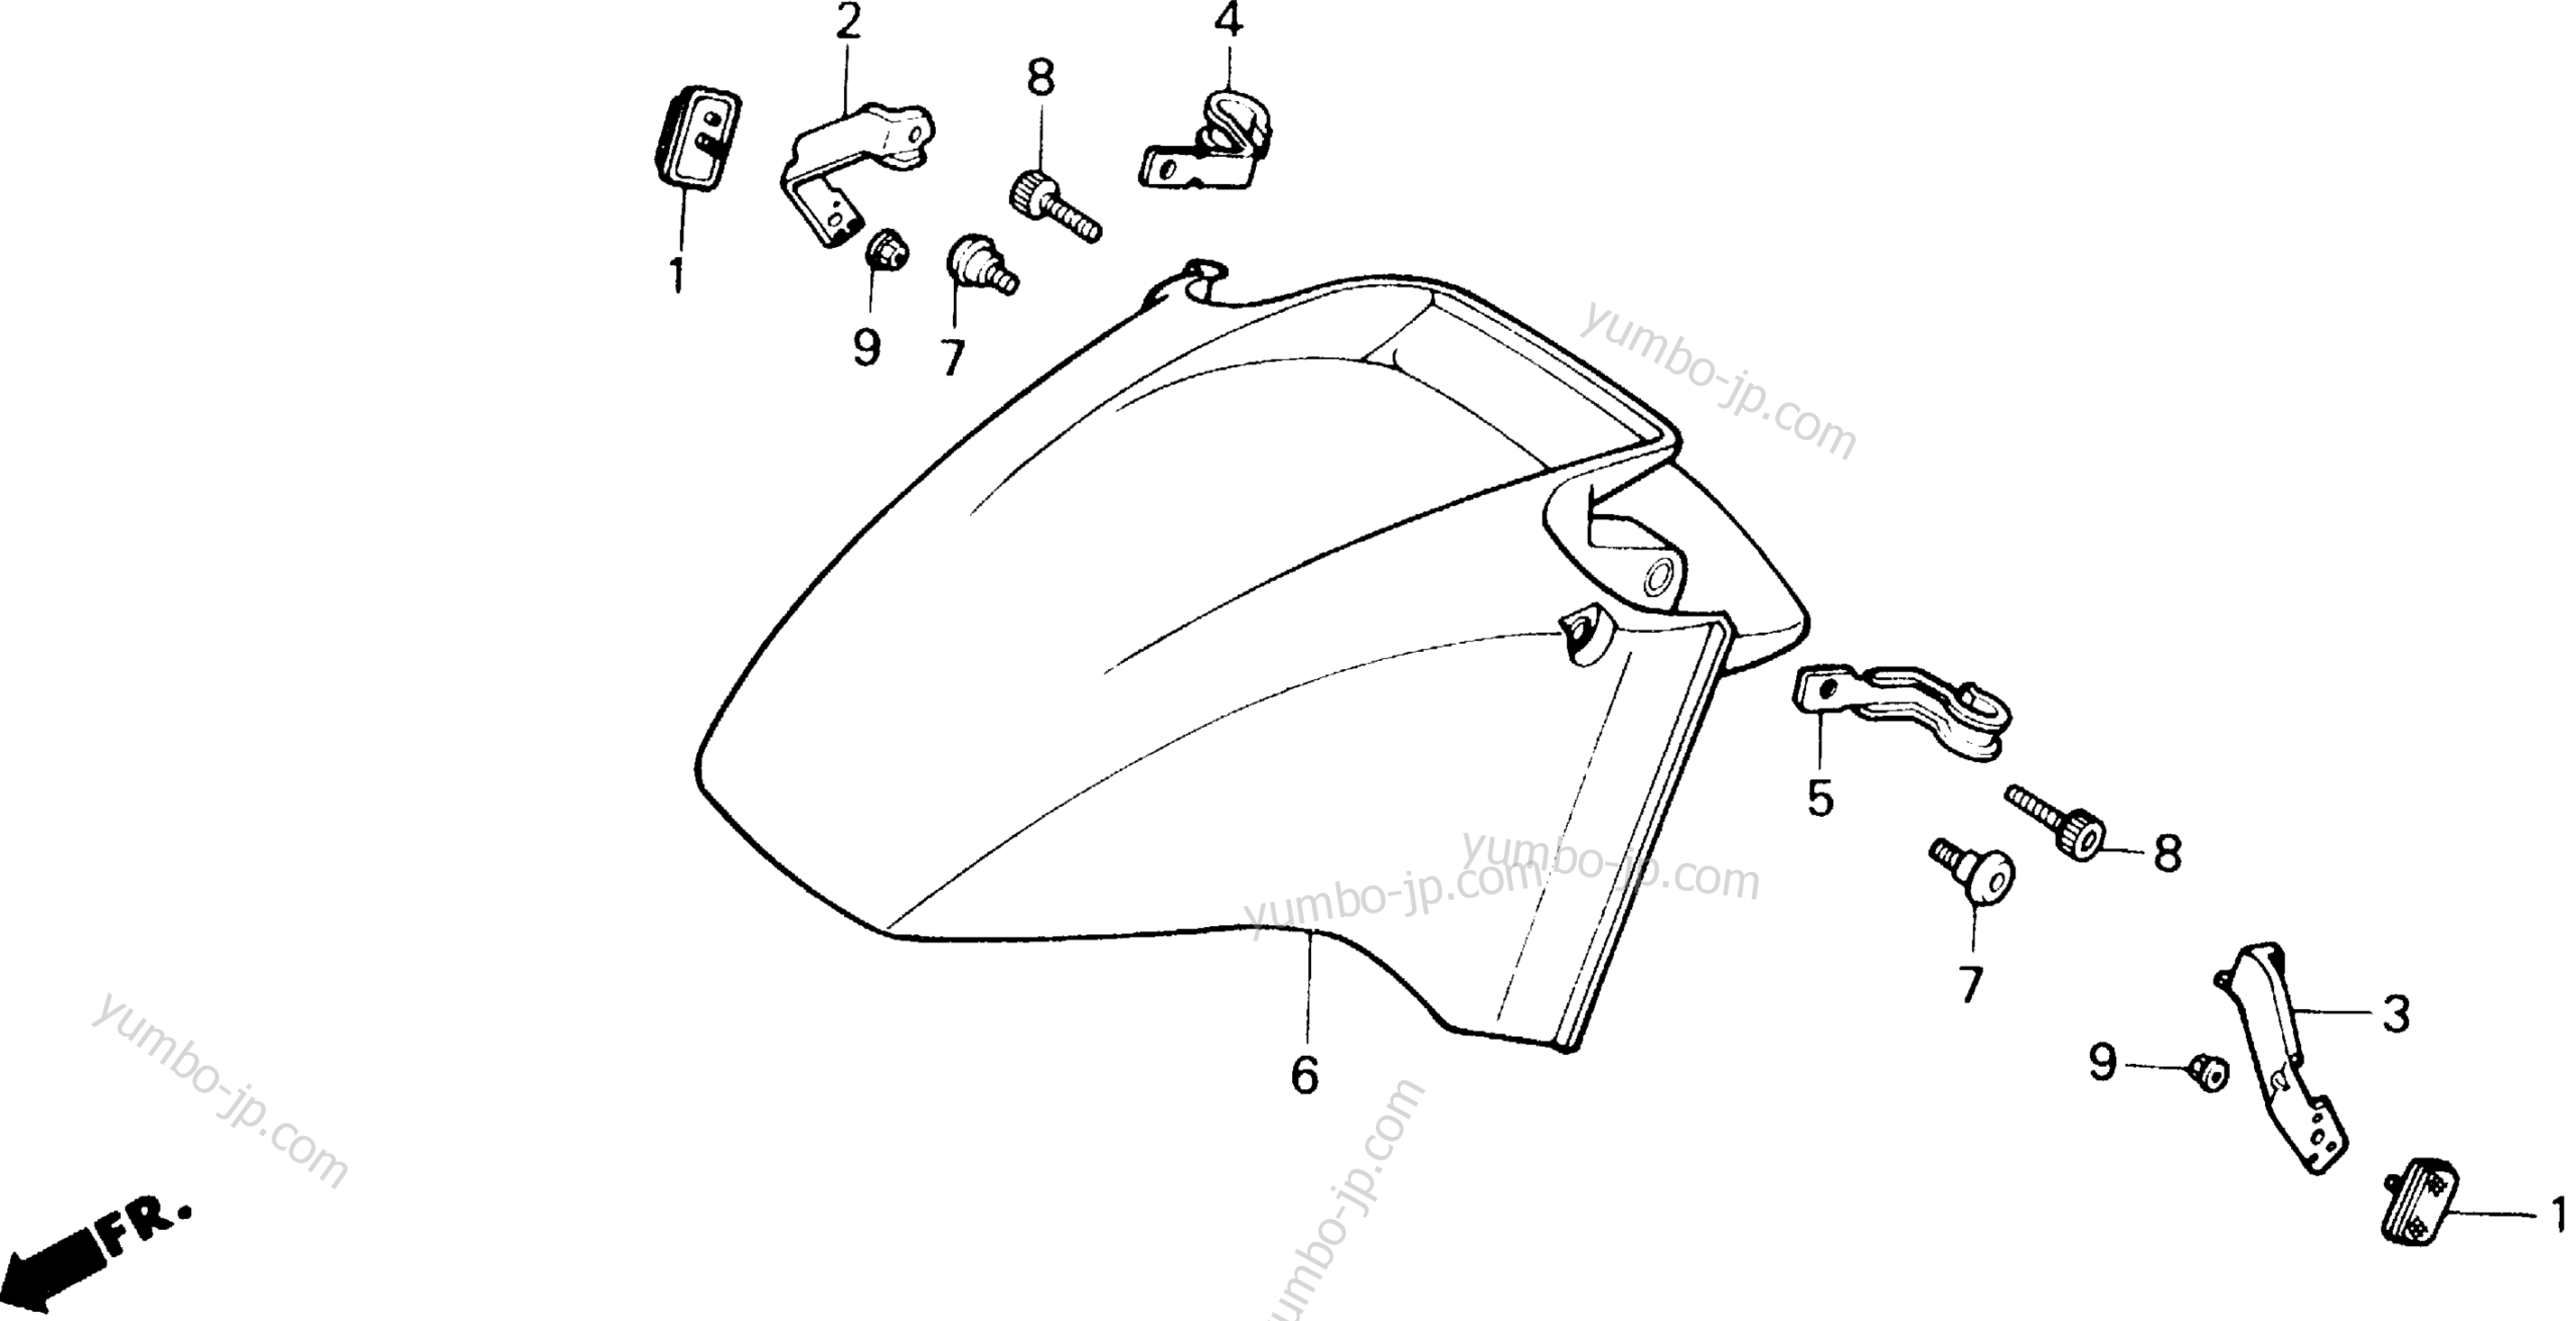 FRONT FENDER for motorcycles HONDA VFR700F2 AC 1987 year